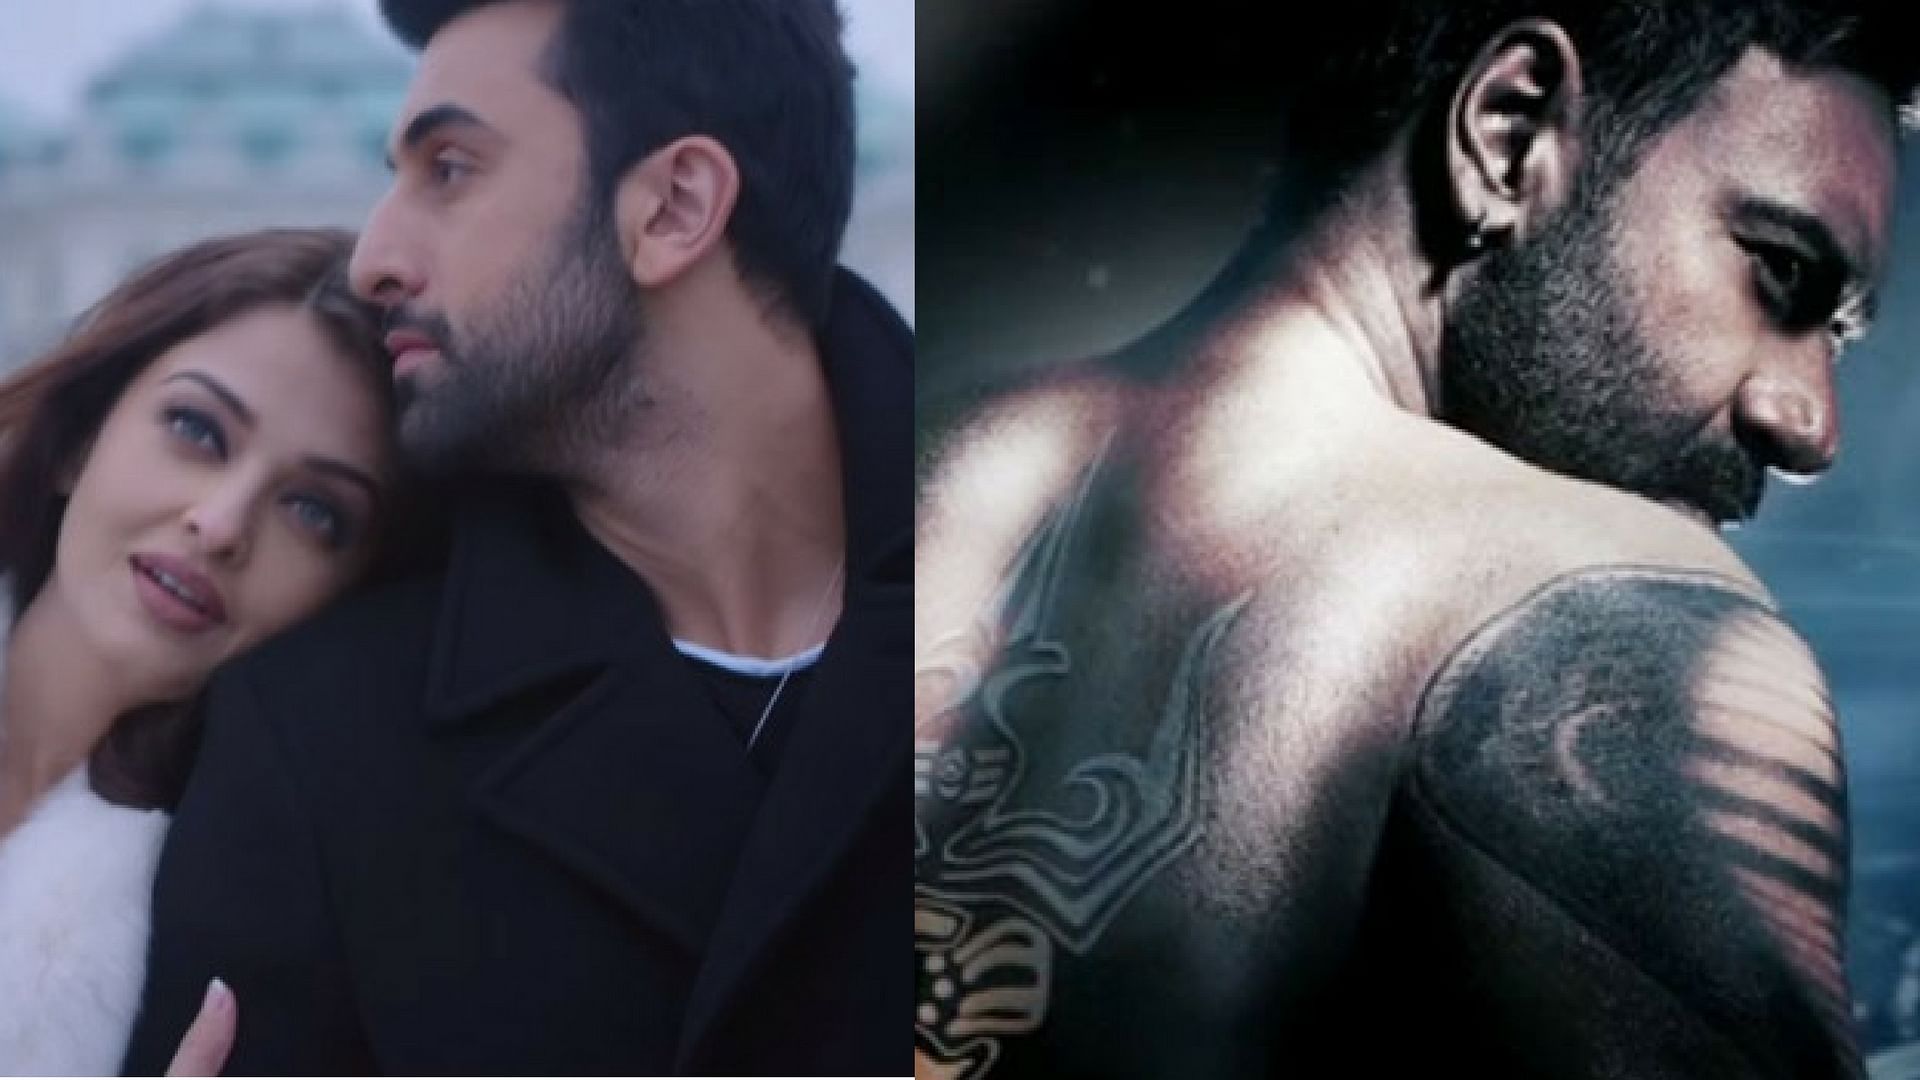 BollywoodShaadis.com - Deepika Padukone had got her ex-boyfriend, Ranbir  Kapoor's initials tattooed on the nape of her neck. However, she once  revealed that she had no regrets about her tattoo even after